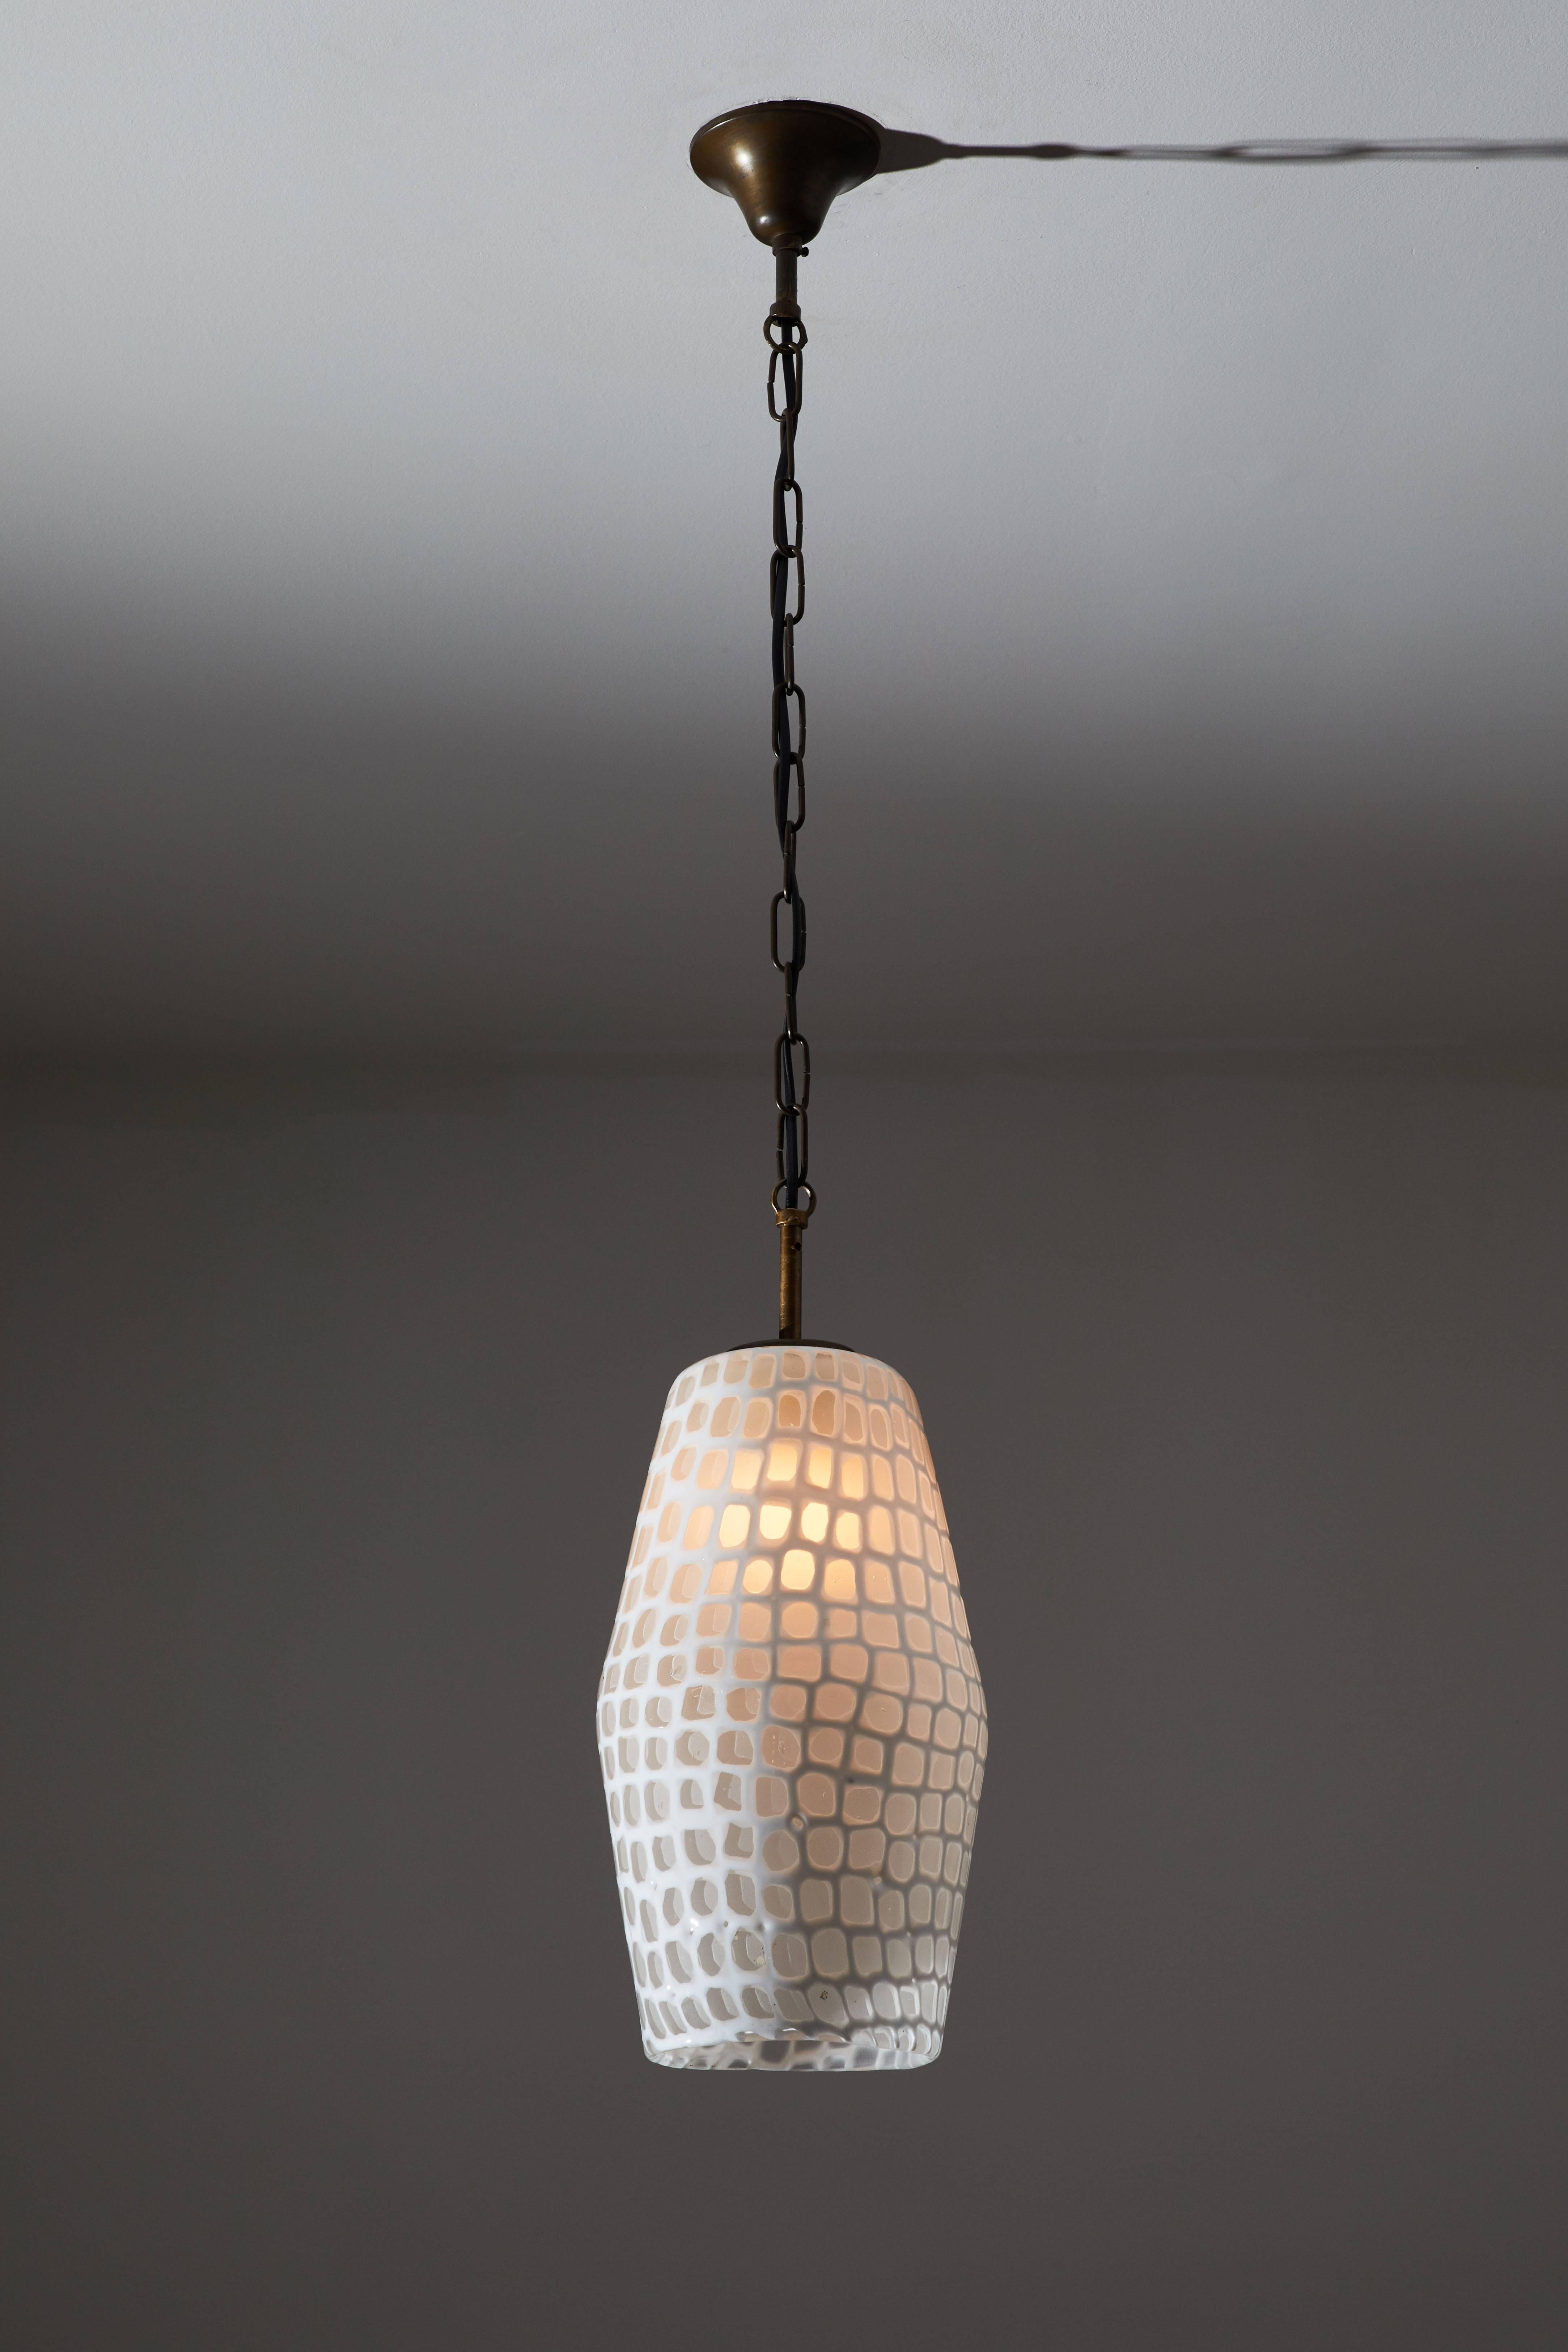 Suspension light designed by Tobia Scarpa in Italy, circa 1960s. Handblown and hand glazed Occhi glass diffuser. Wired for US junction boxes. Original brass chain and canopy. Takes one E27 100w maximum bulb. Height displayed is for fixture only.